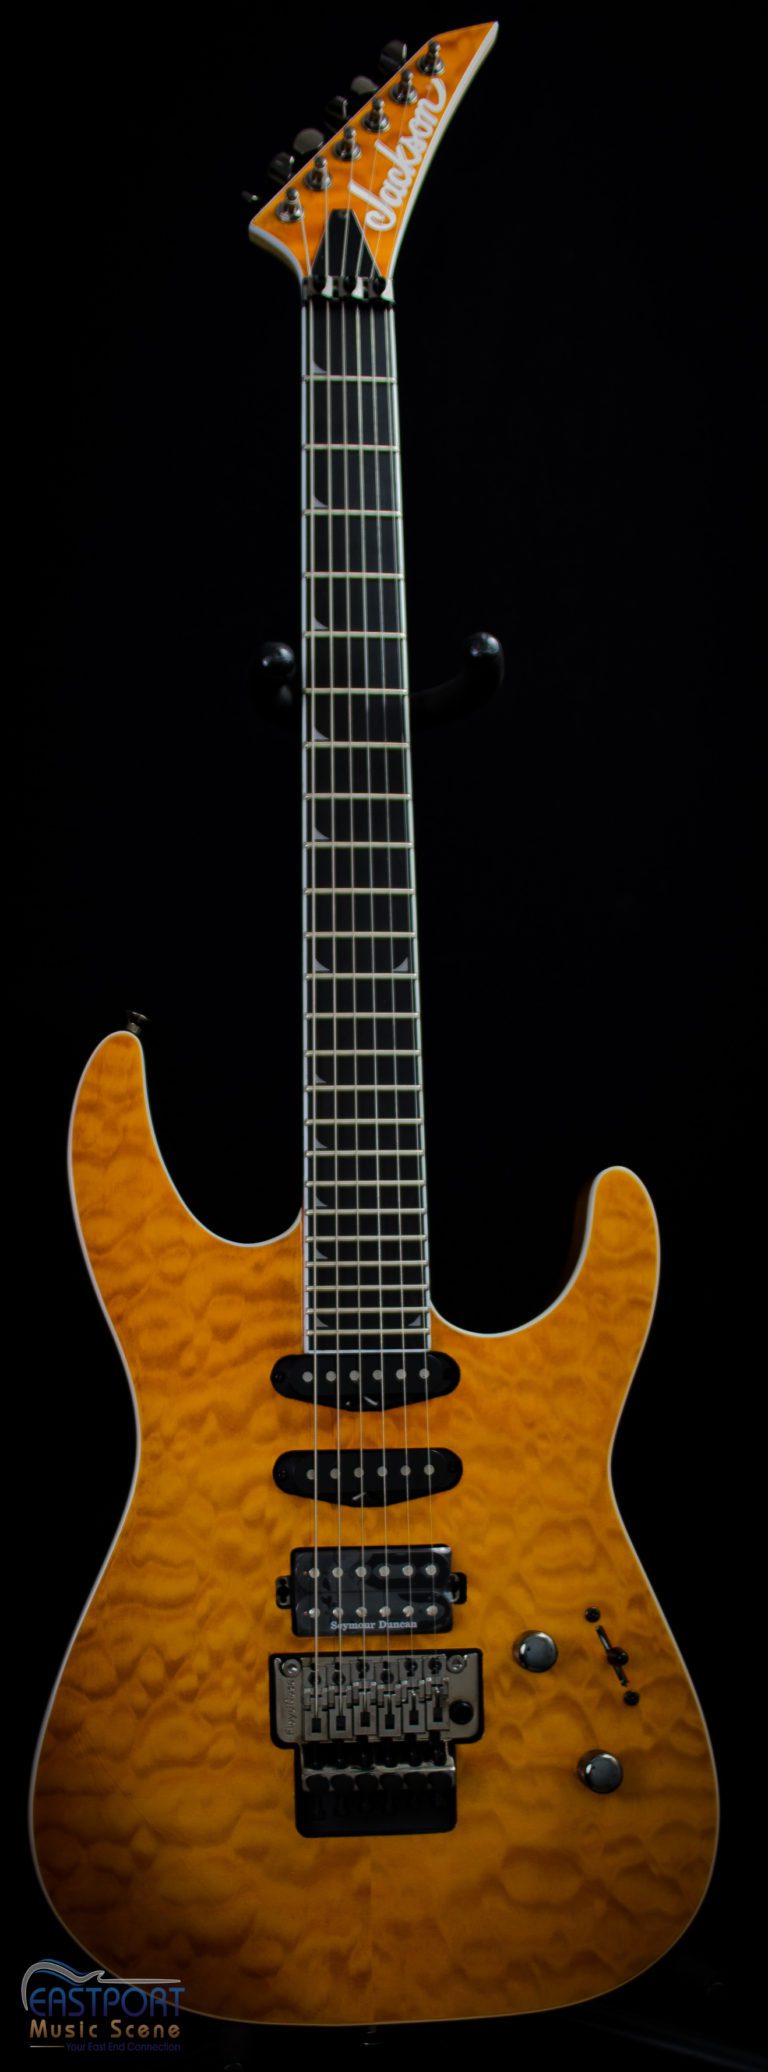 A guitar with an orange body and black neck.